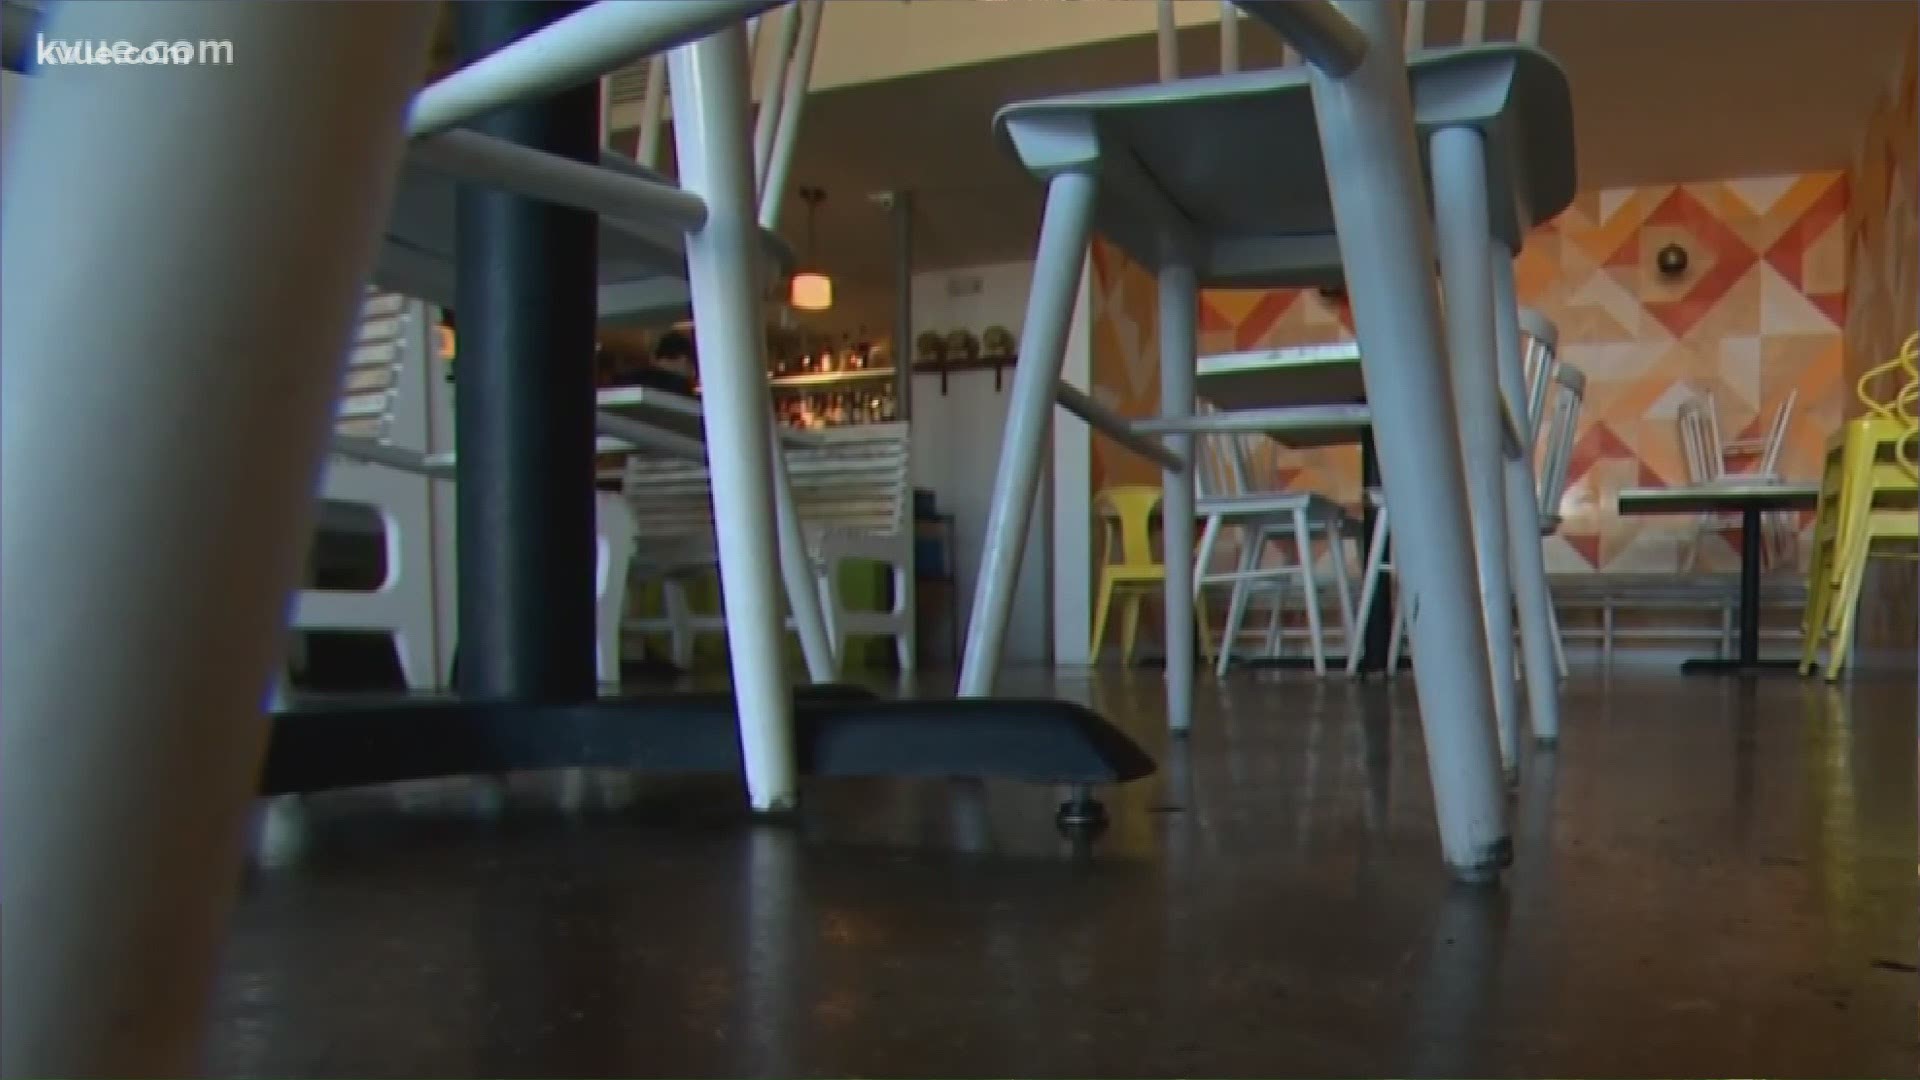 The City of Austin is asking restaurants to shut down indoor dining, allow 50% capacity for outdoor seating and shut their doors by 10:30 p.m.